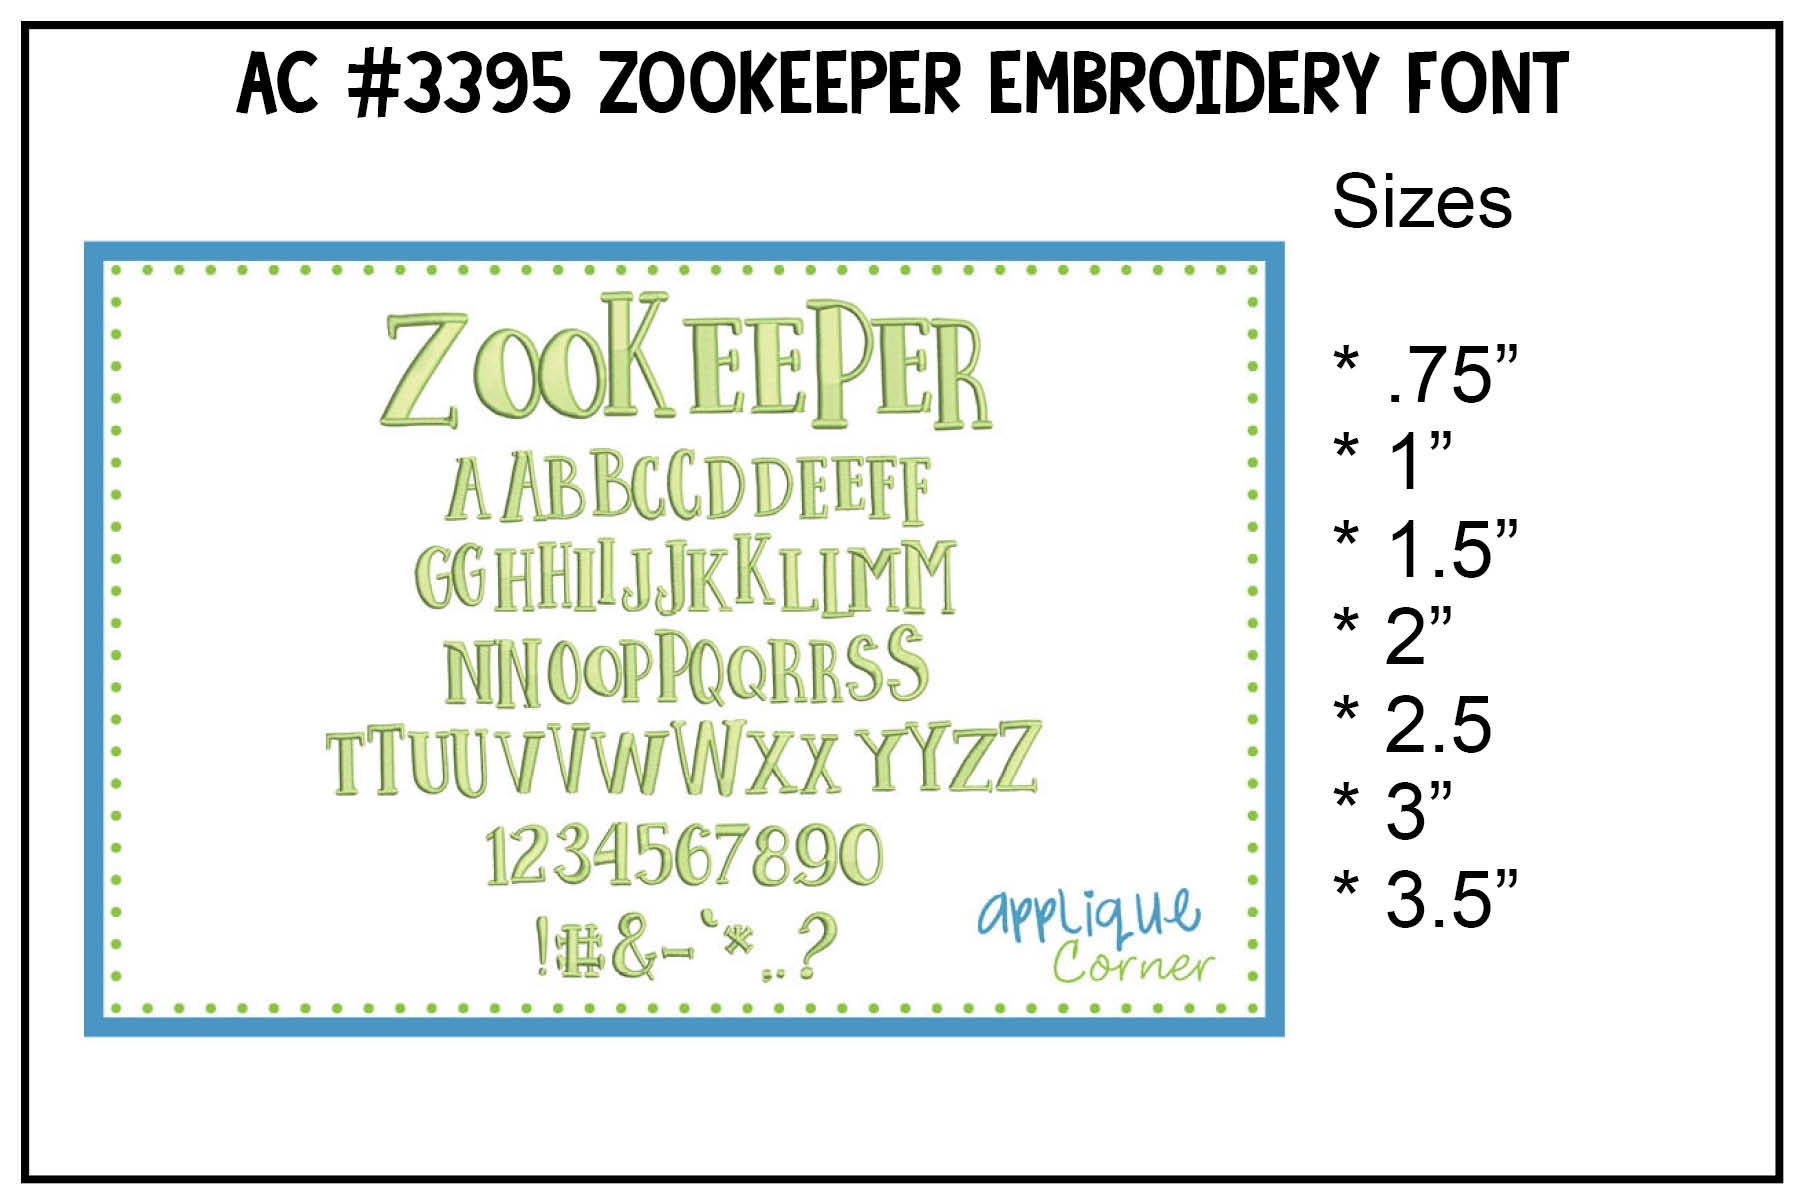 Zookeeper Embroidery Font